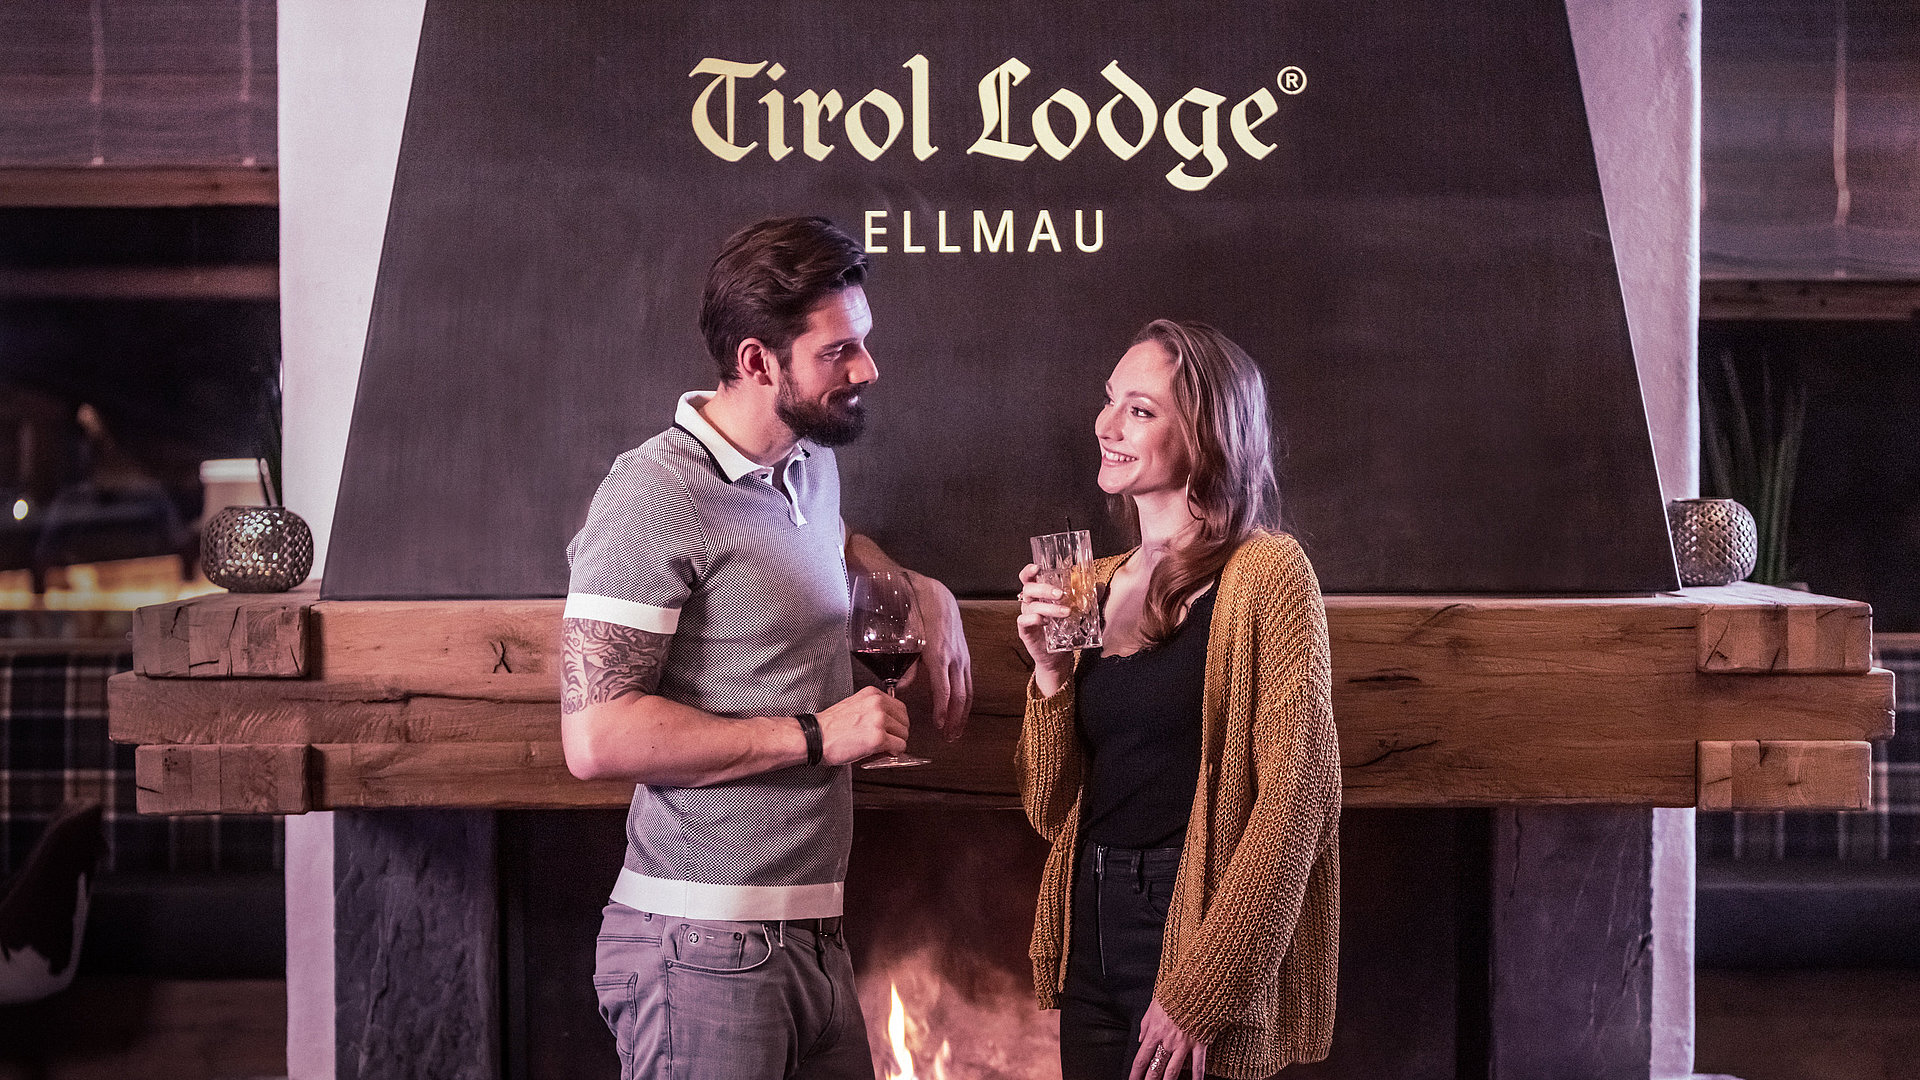 Bring your evening to an end in the Tirol Lodge in Ellmau